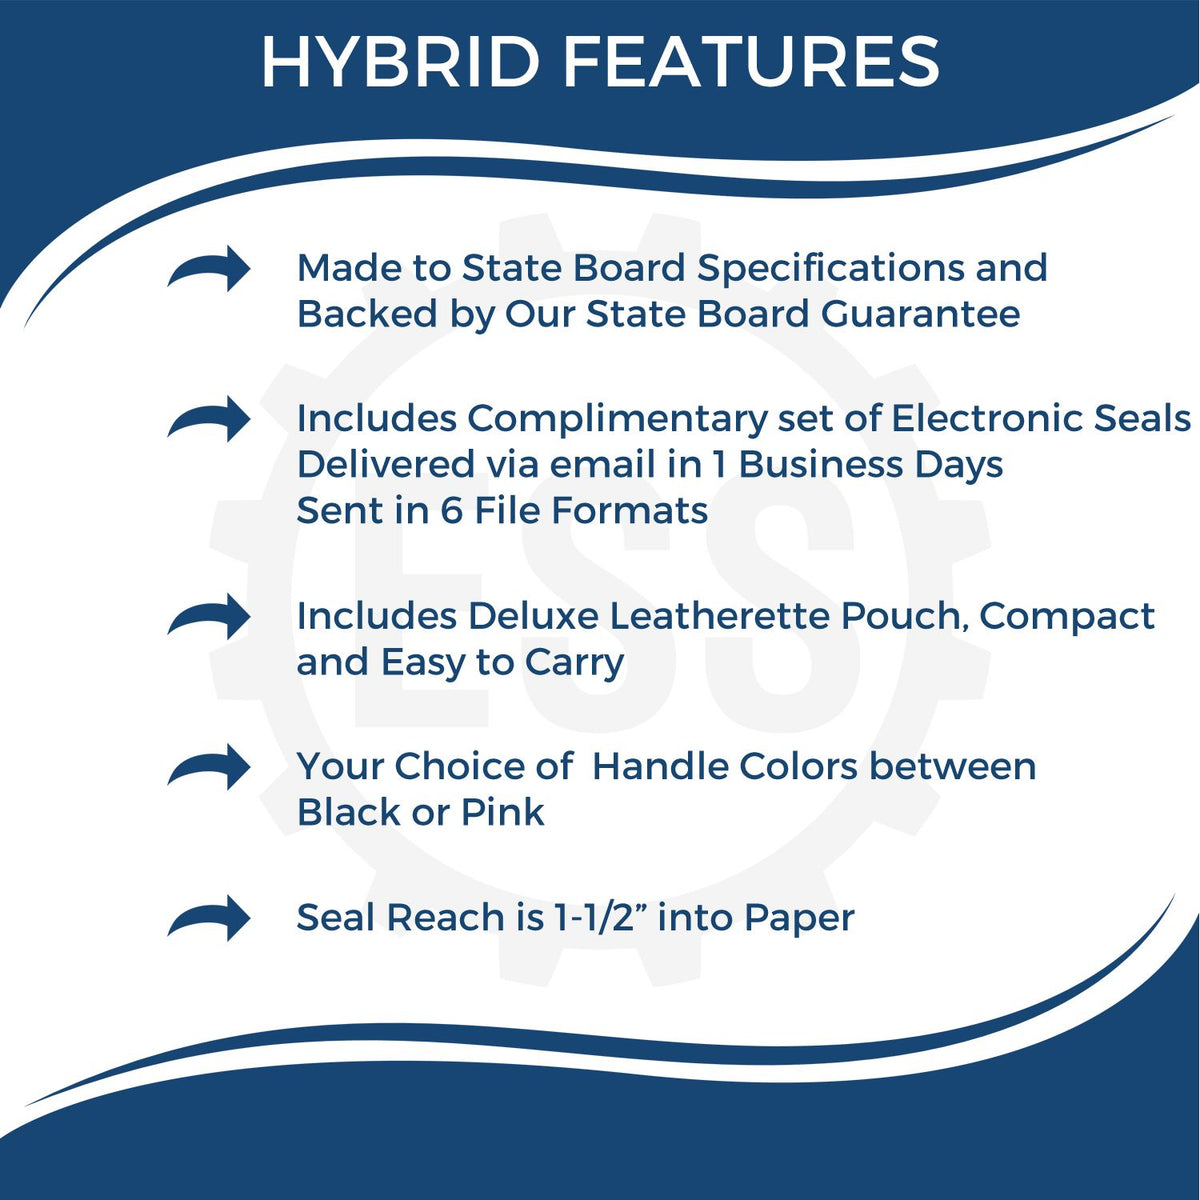 A picture of an infographic highlighting the selling points for the Hybrid Missouri Land Surveyor Seal